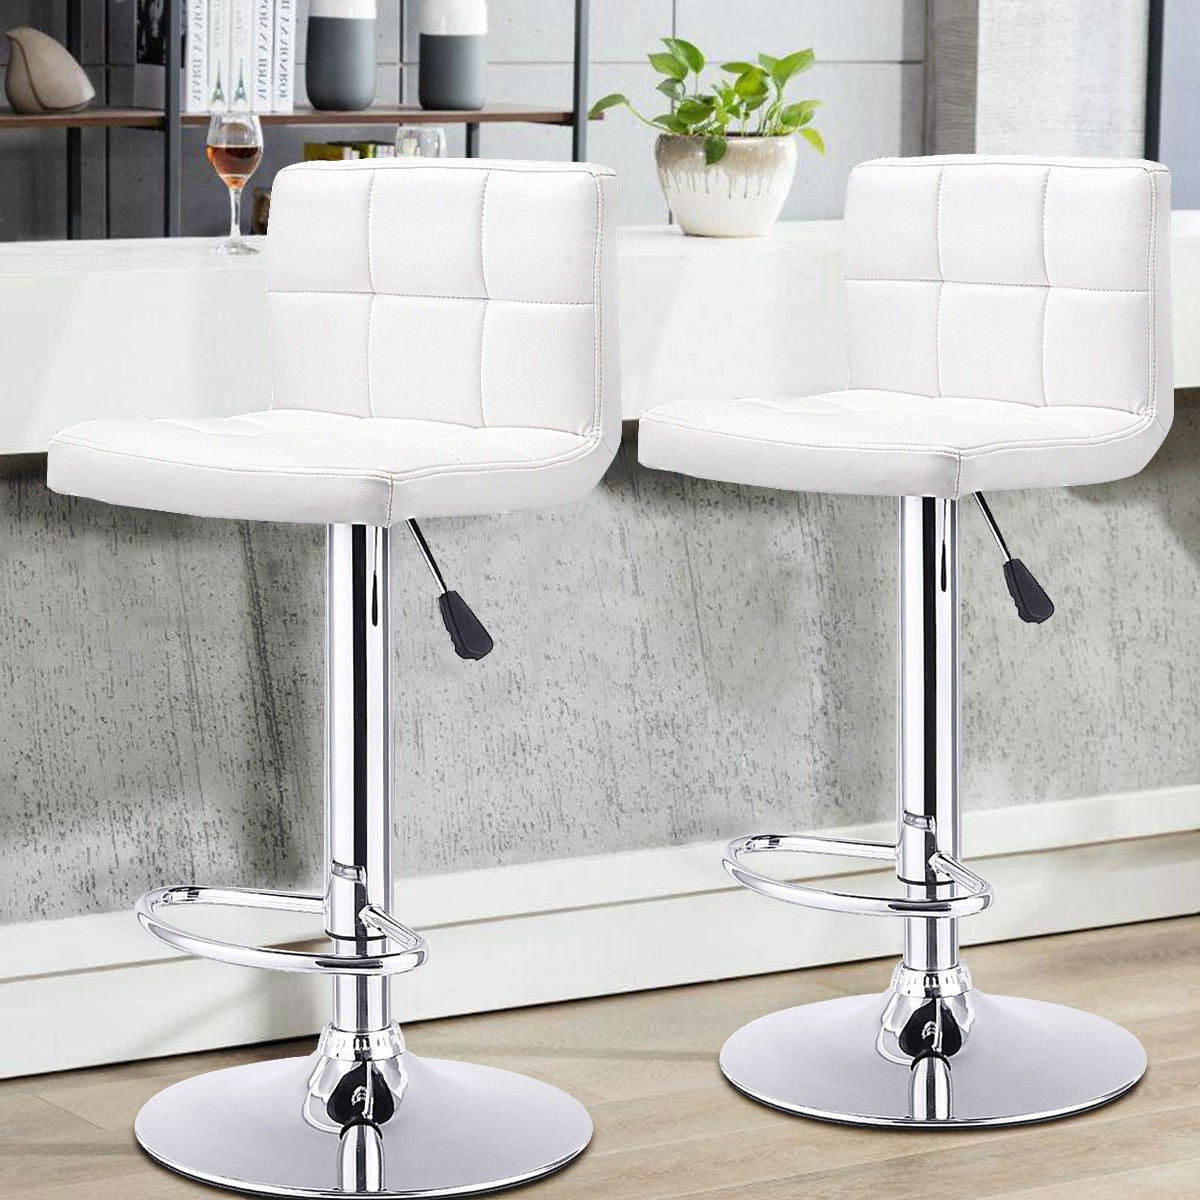 Dining > Barstools - Set Of 2 White Faux Leather Swivel Bar Stools Pub Chairs